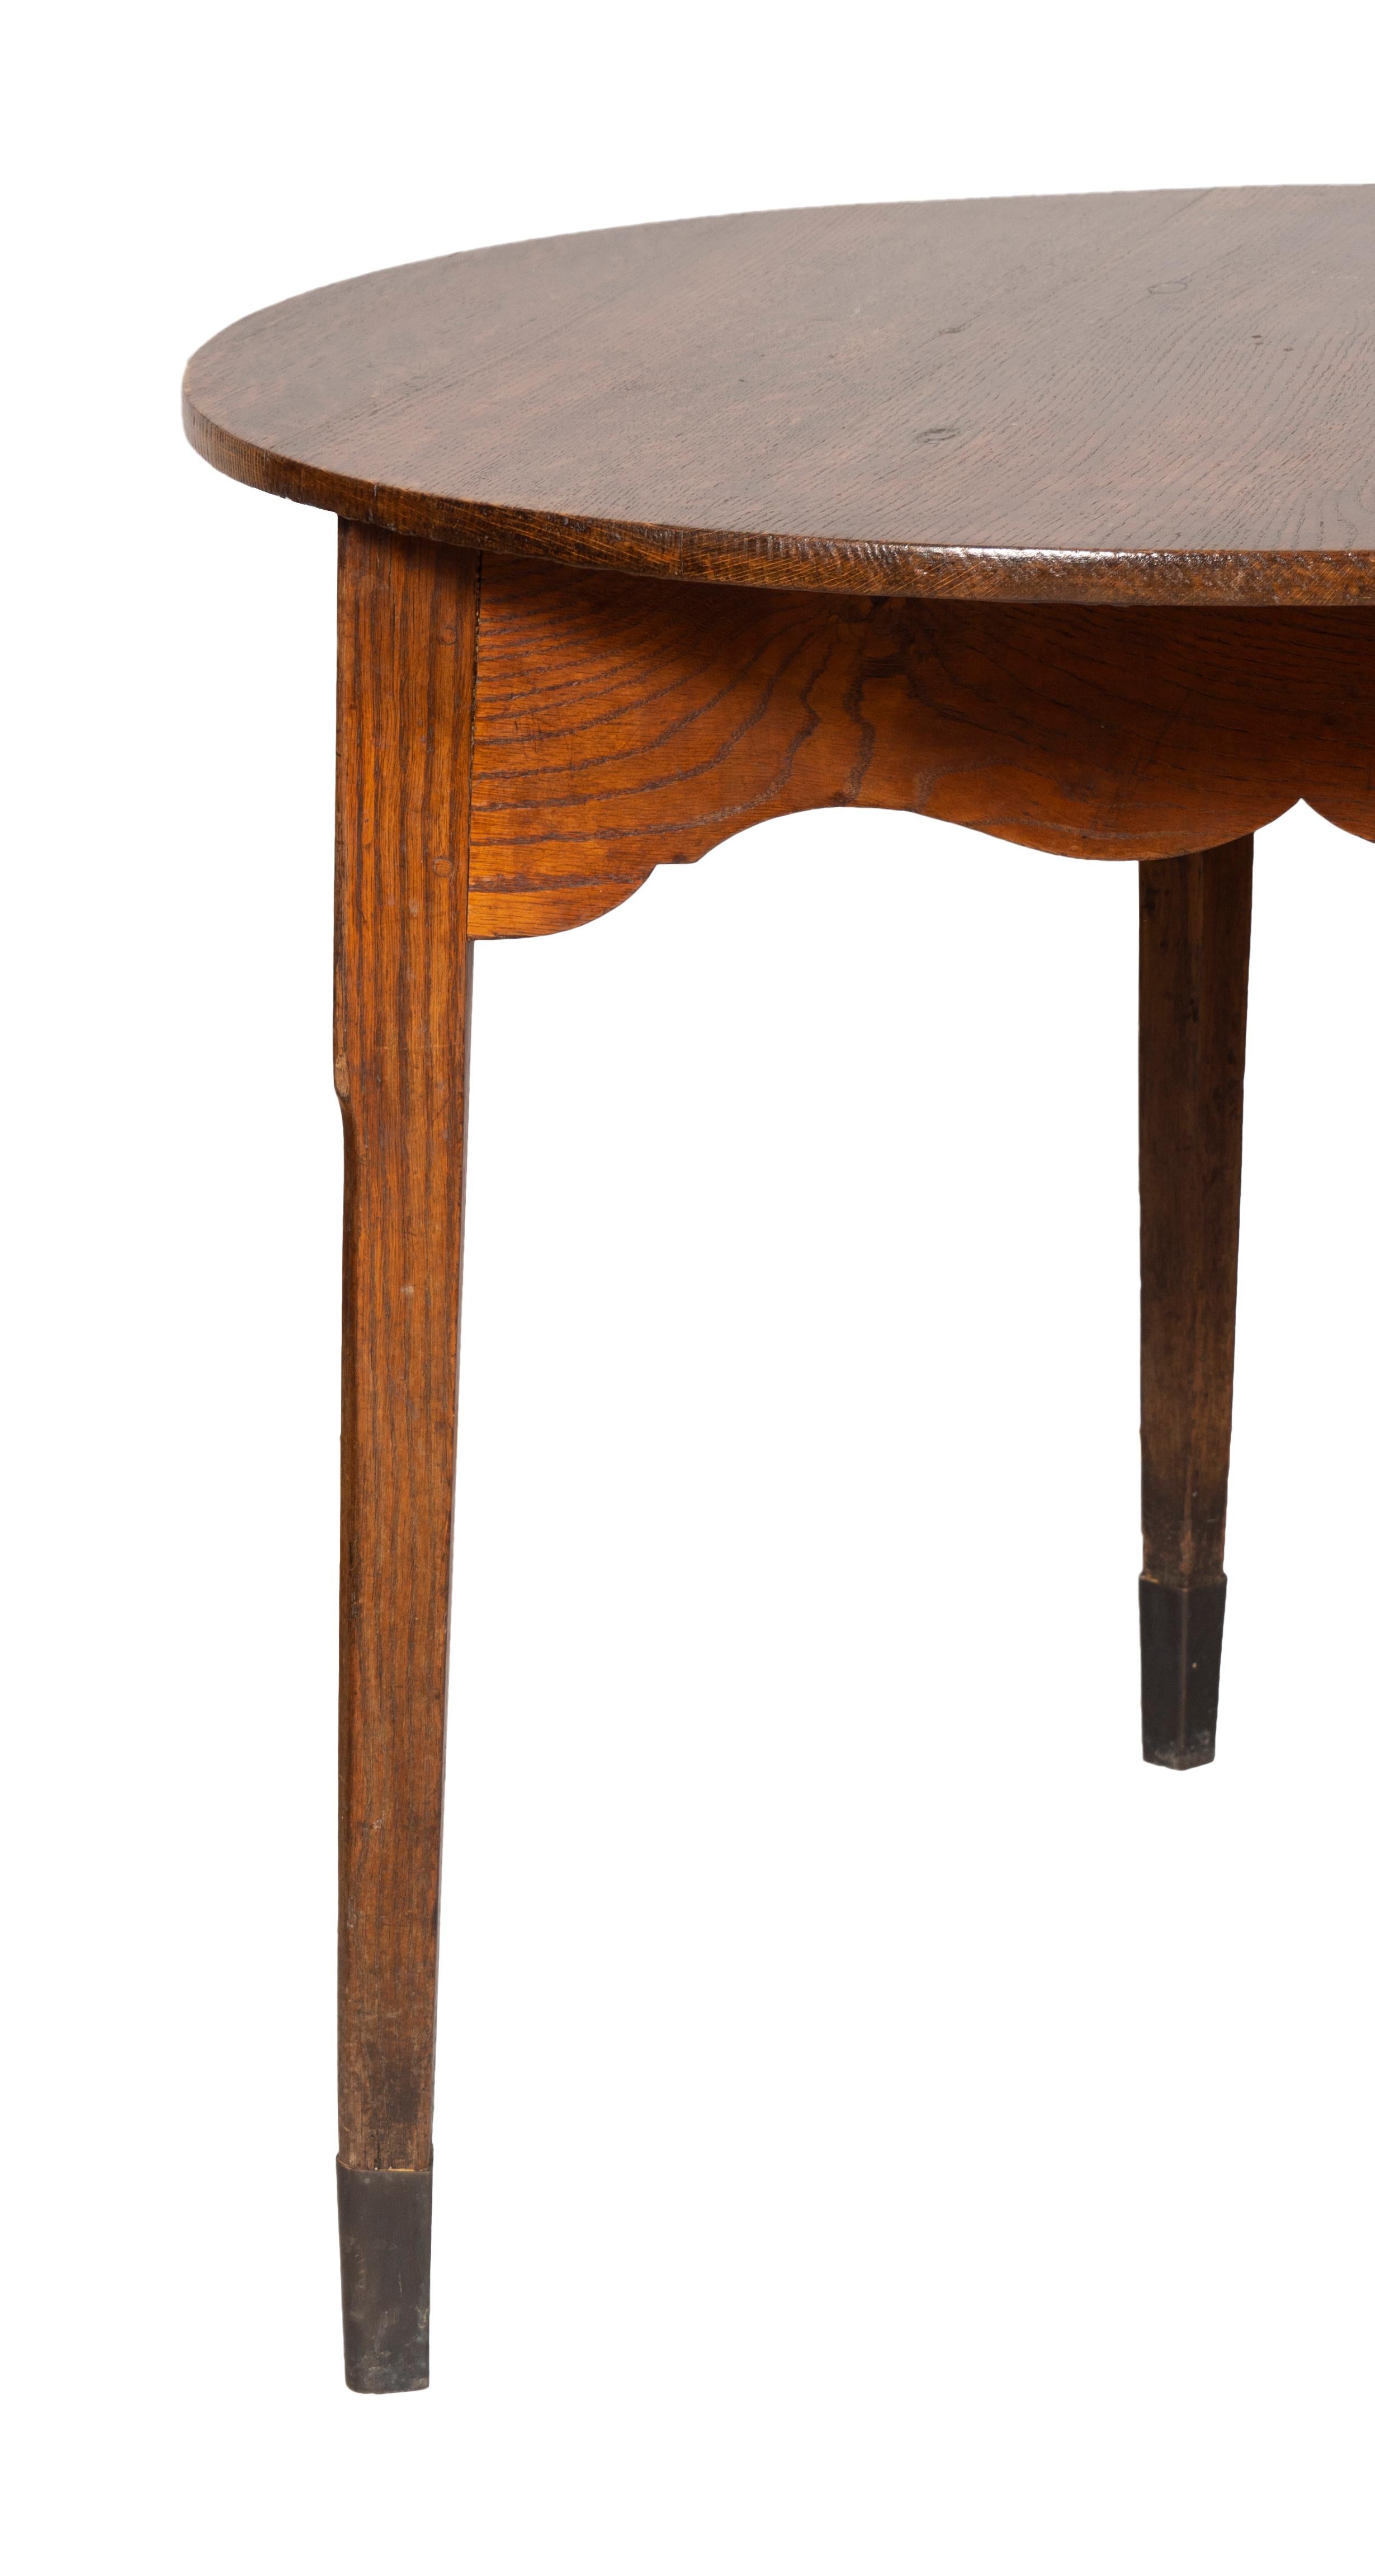 Circular top and raised on three tapered square legs with oxidized brass feet.